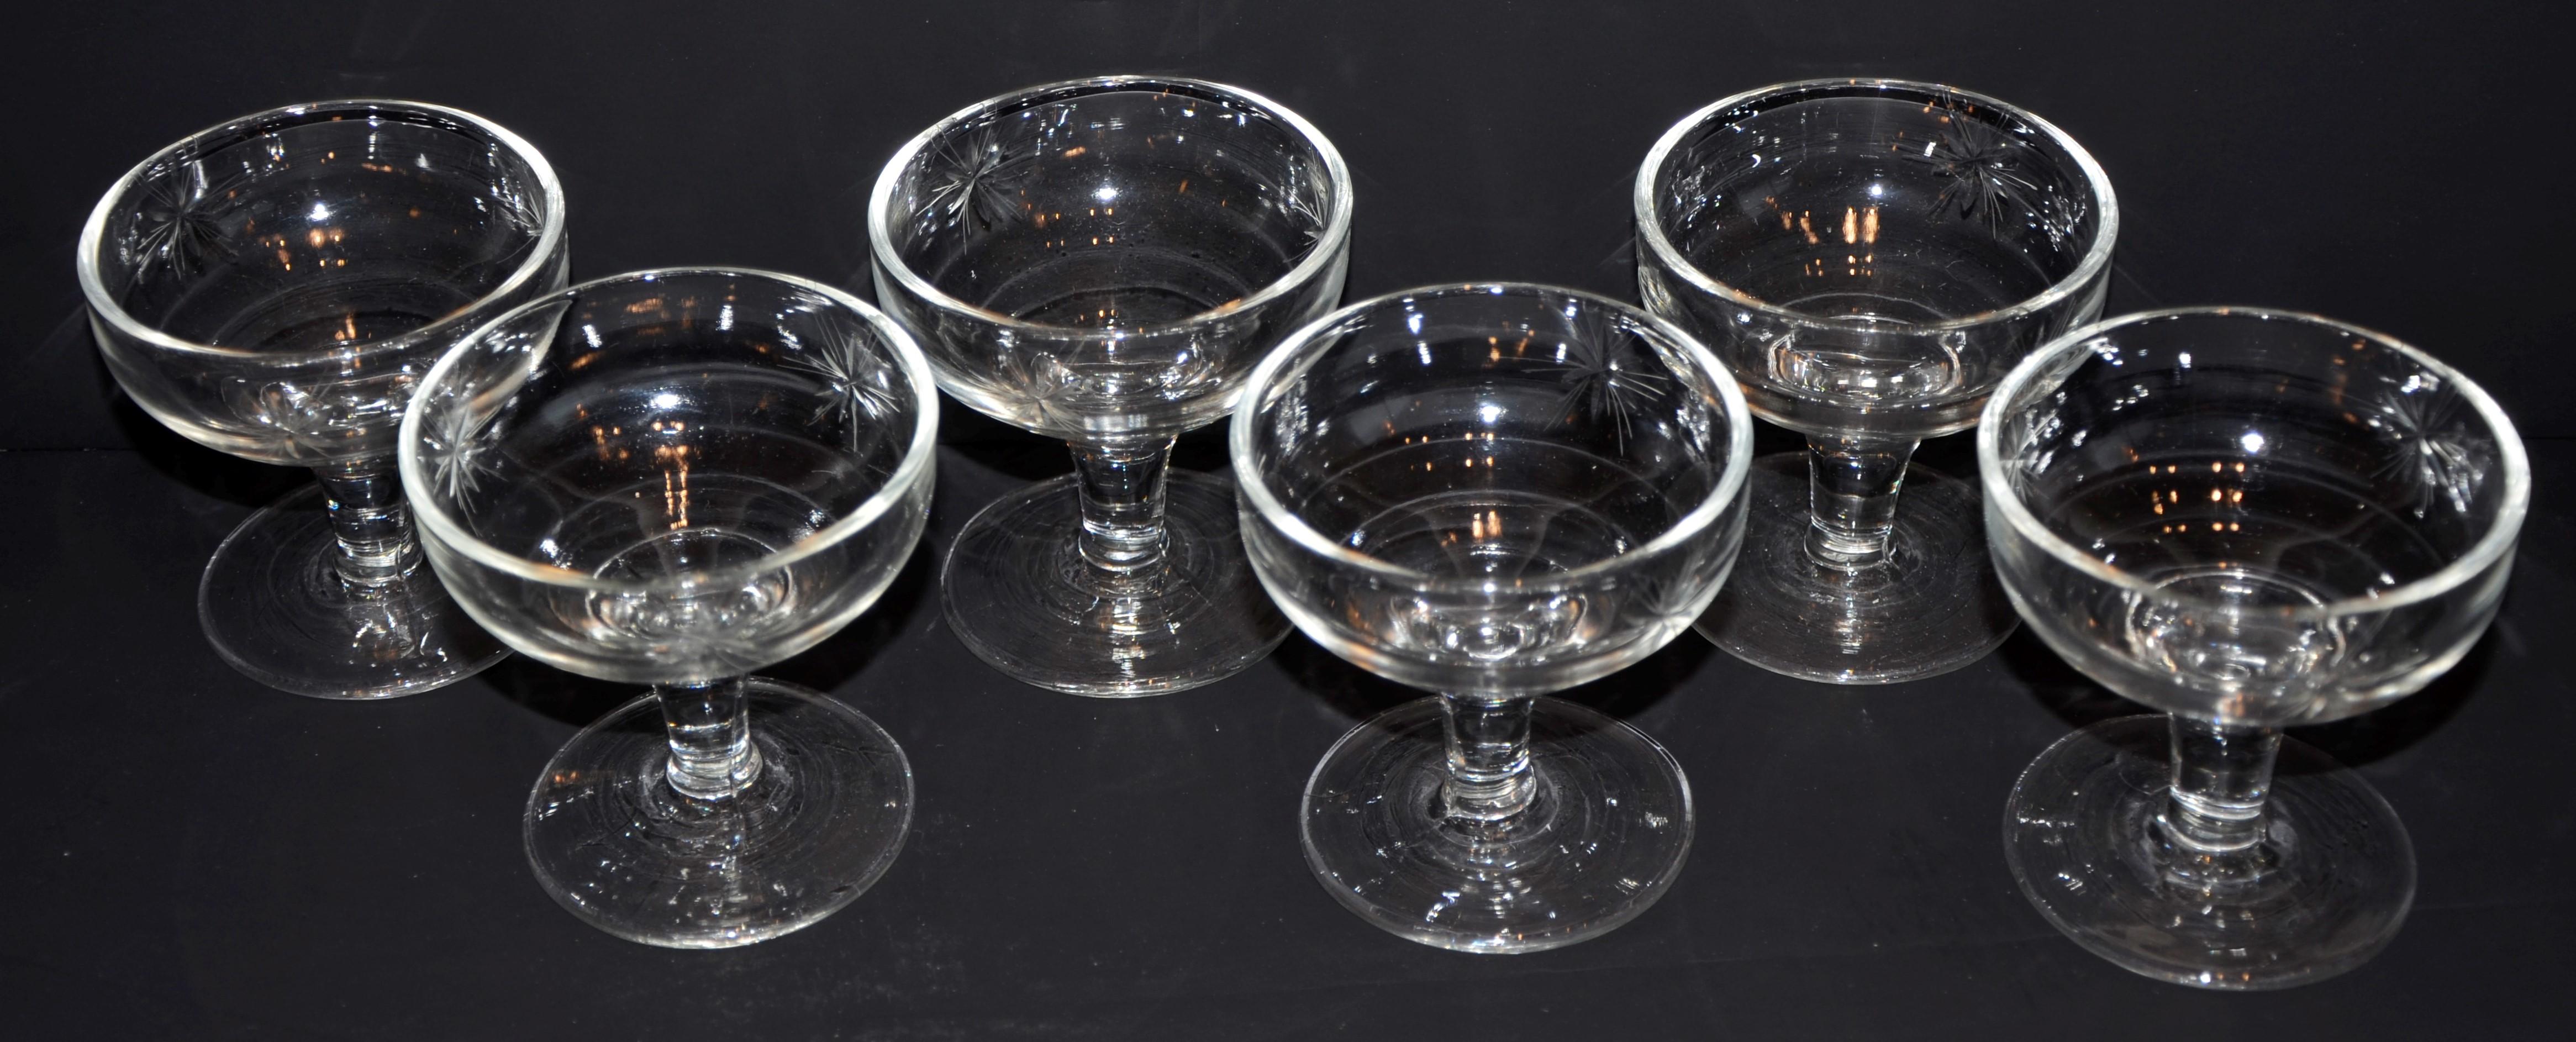 Set of 6 Starburst Etched Glass Champagne Coupe Glasses In Good Condition For Sale In Houston, TX